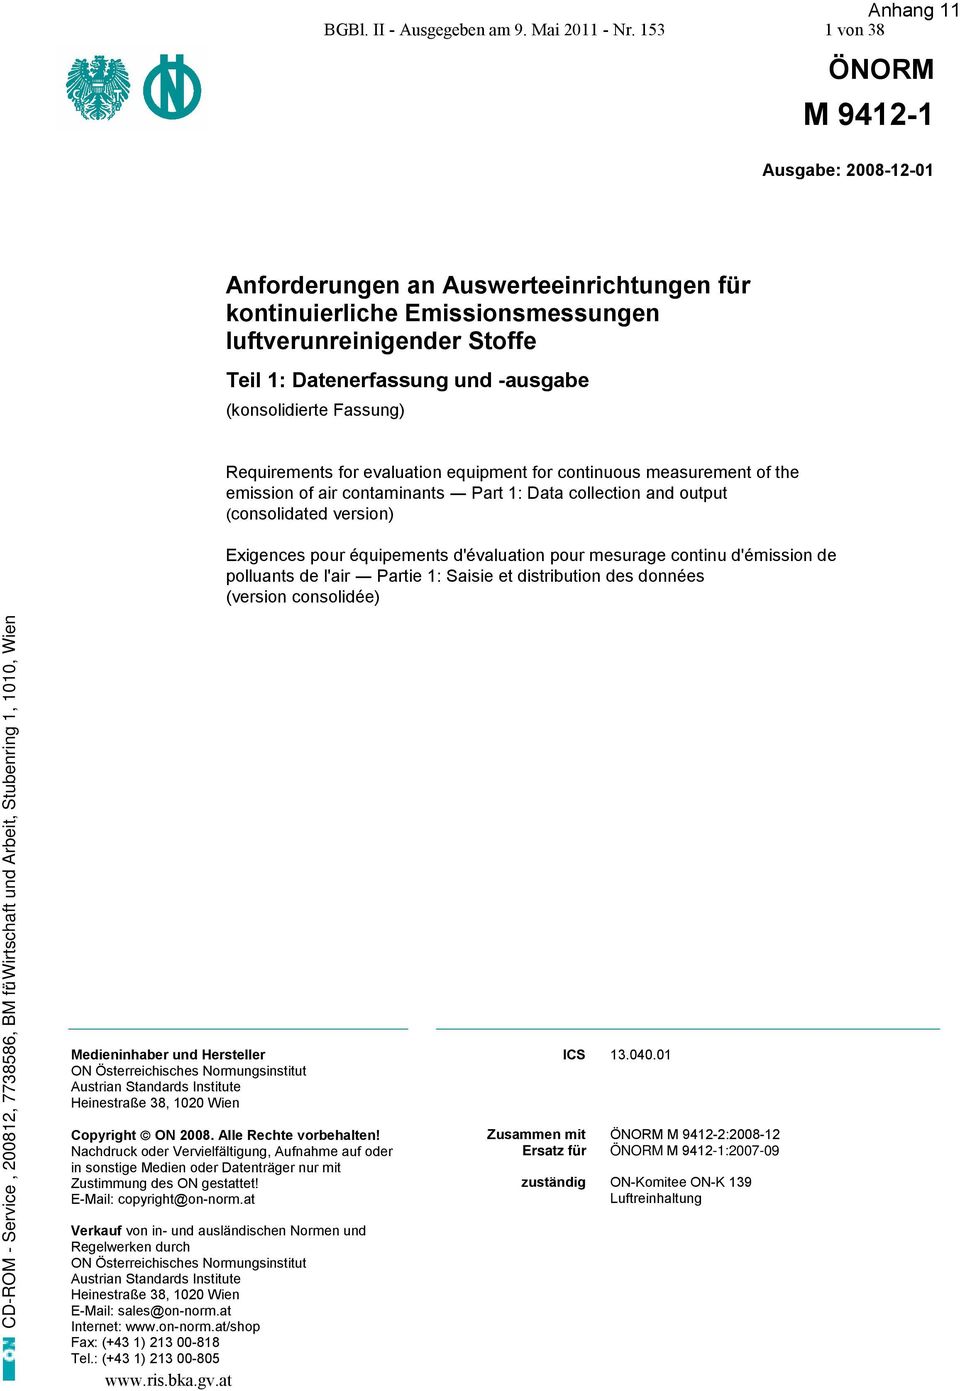 (konsolidierte Fassung) Requirements for evaluation equipment for continuous measurement of the emission of air contaminants Part 1: Data collection and output (consolidated version) Exigences pour